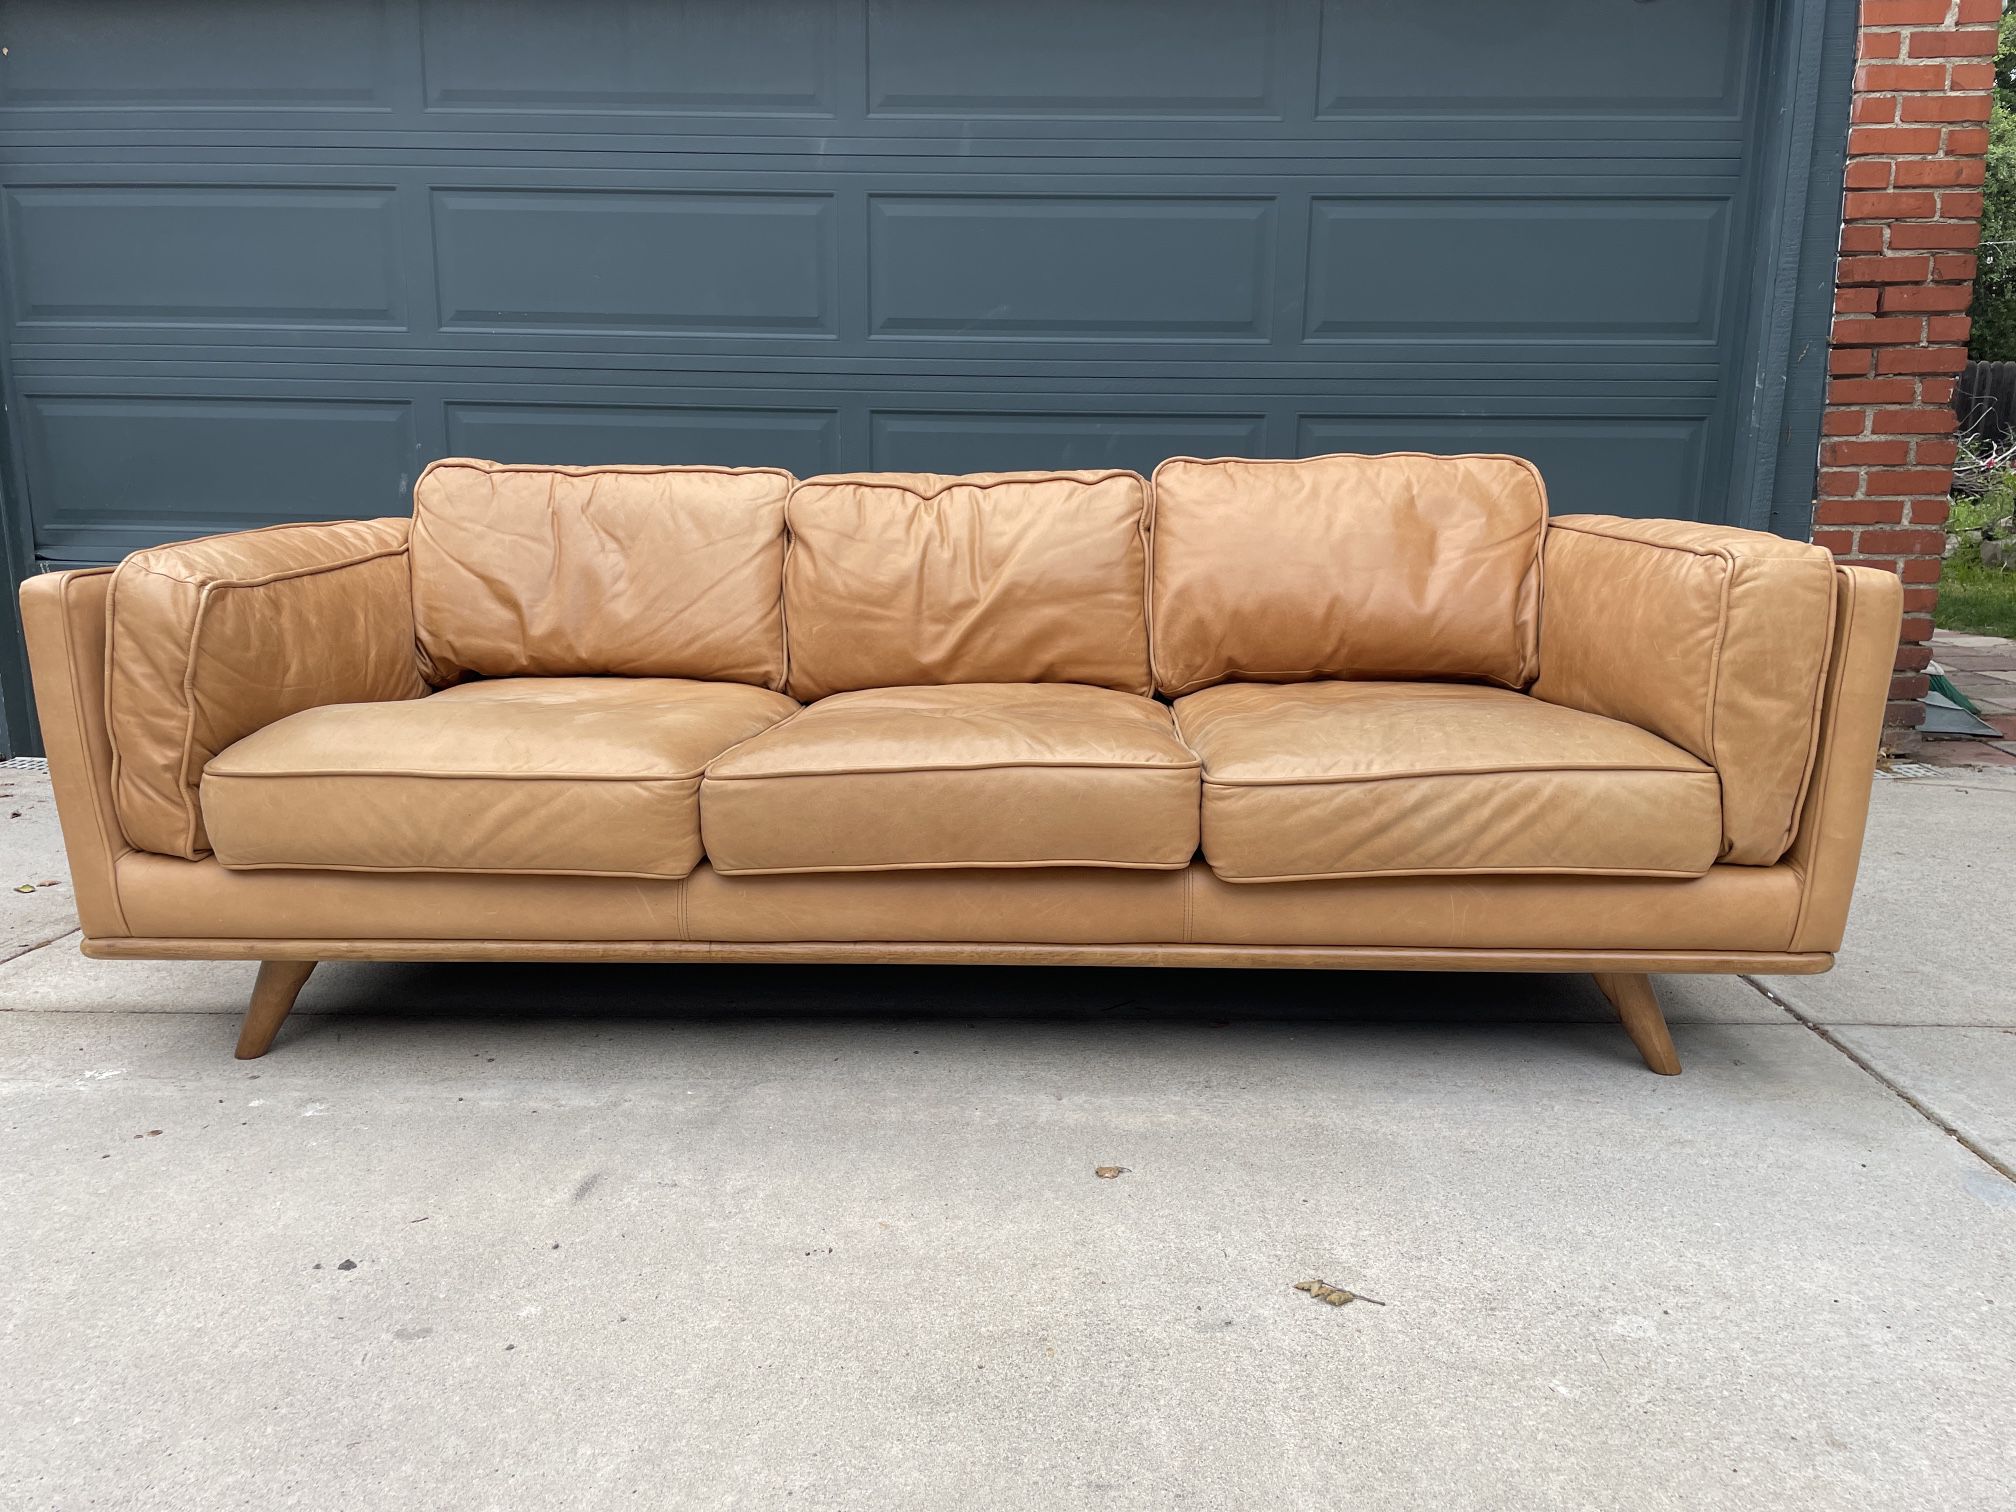 Article Timber Cognac Leather Couch FREE DELIVERY